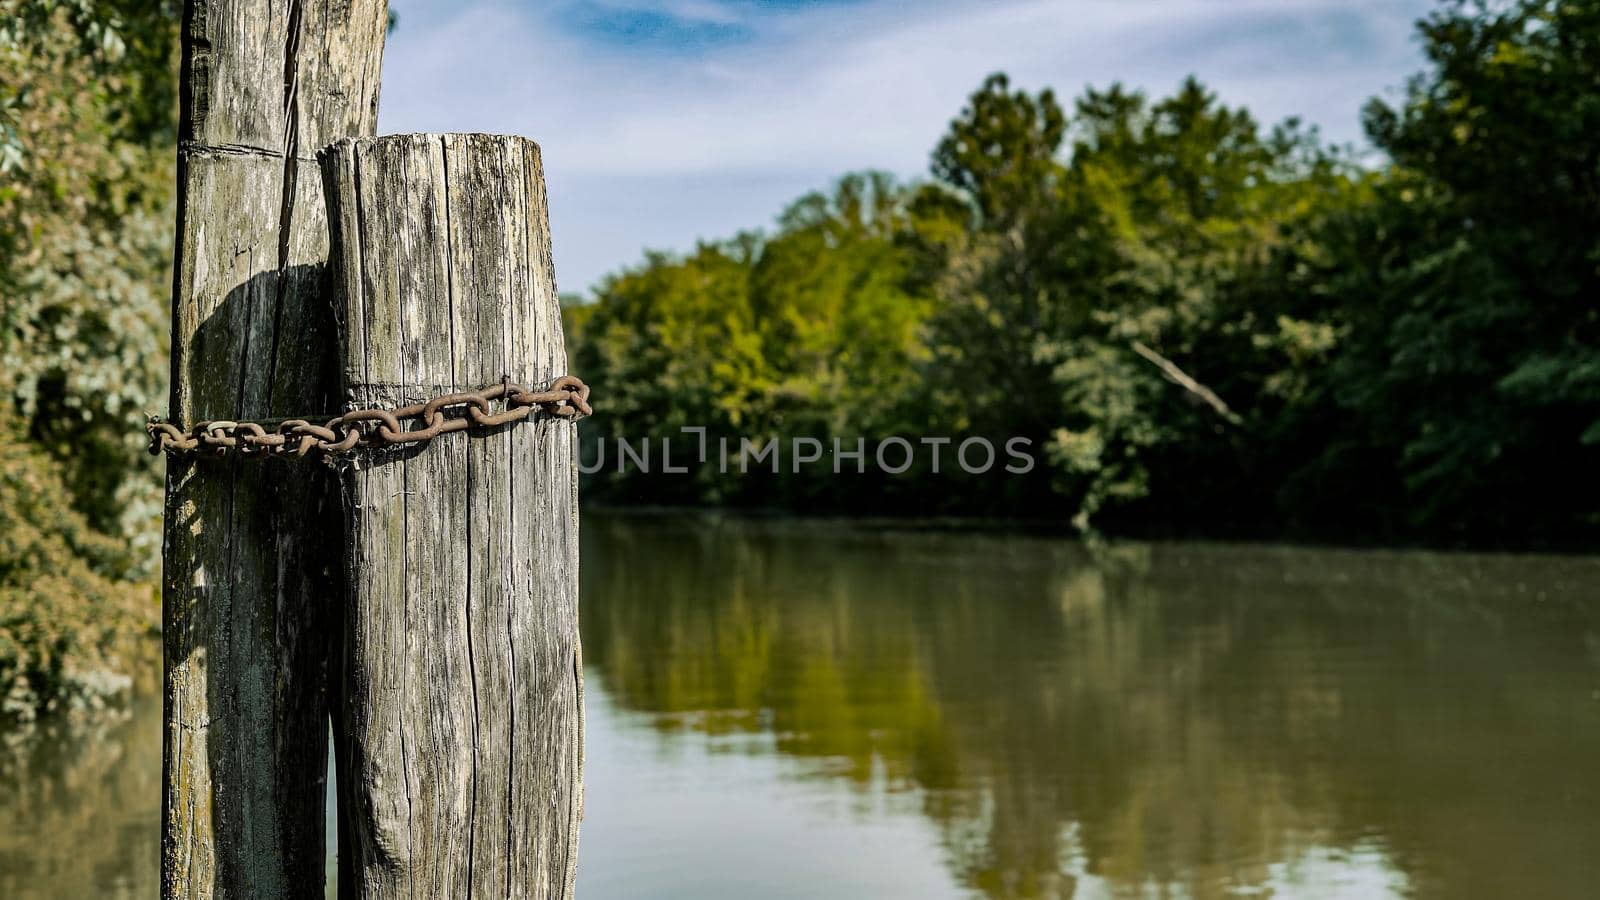 A chain tied to the tree trunk at the Po river Nature reserves in Italy Europe